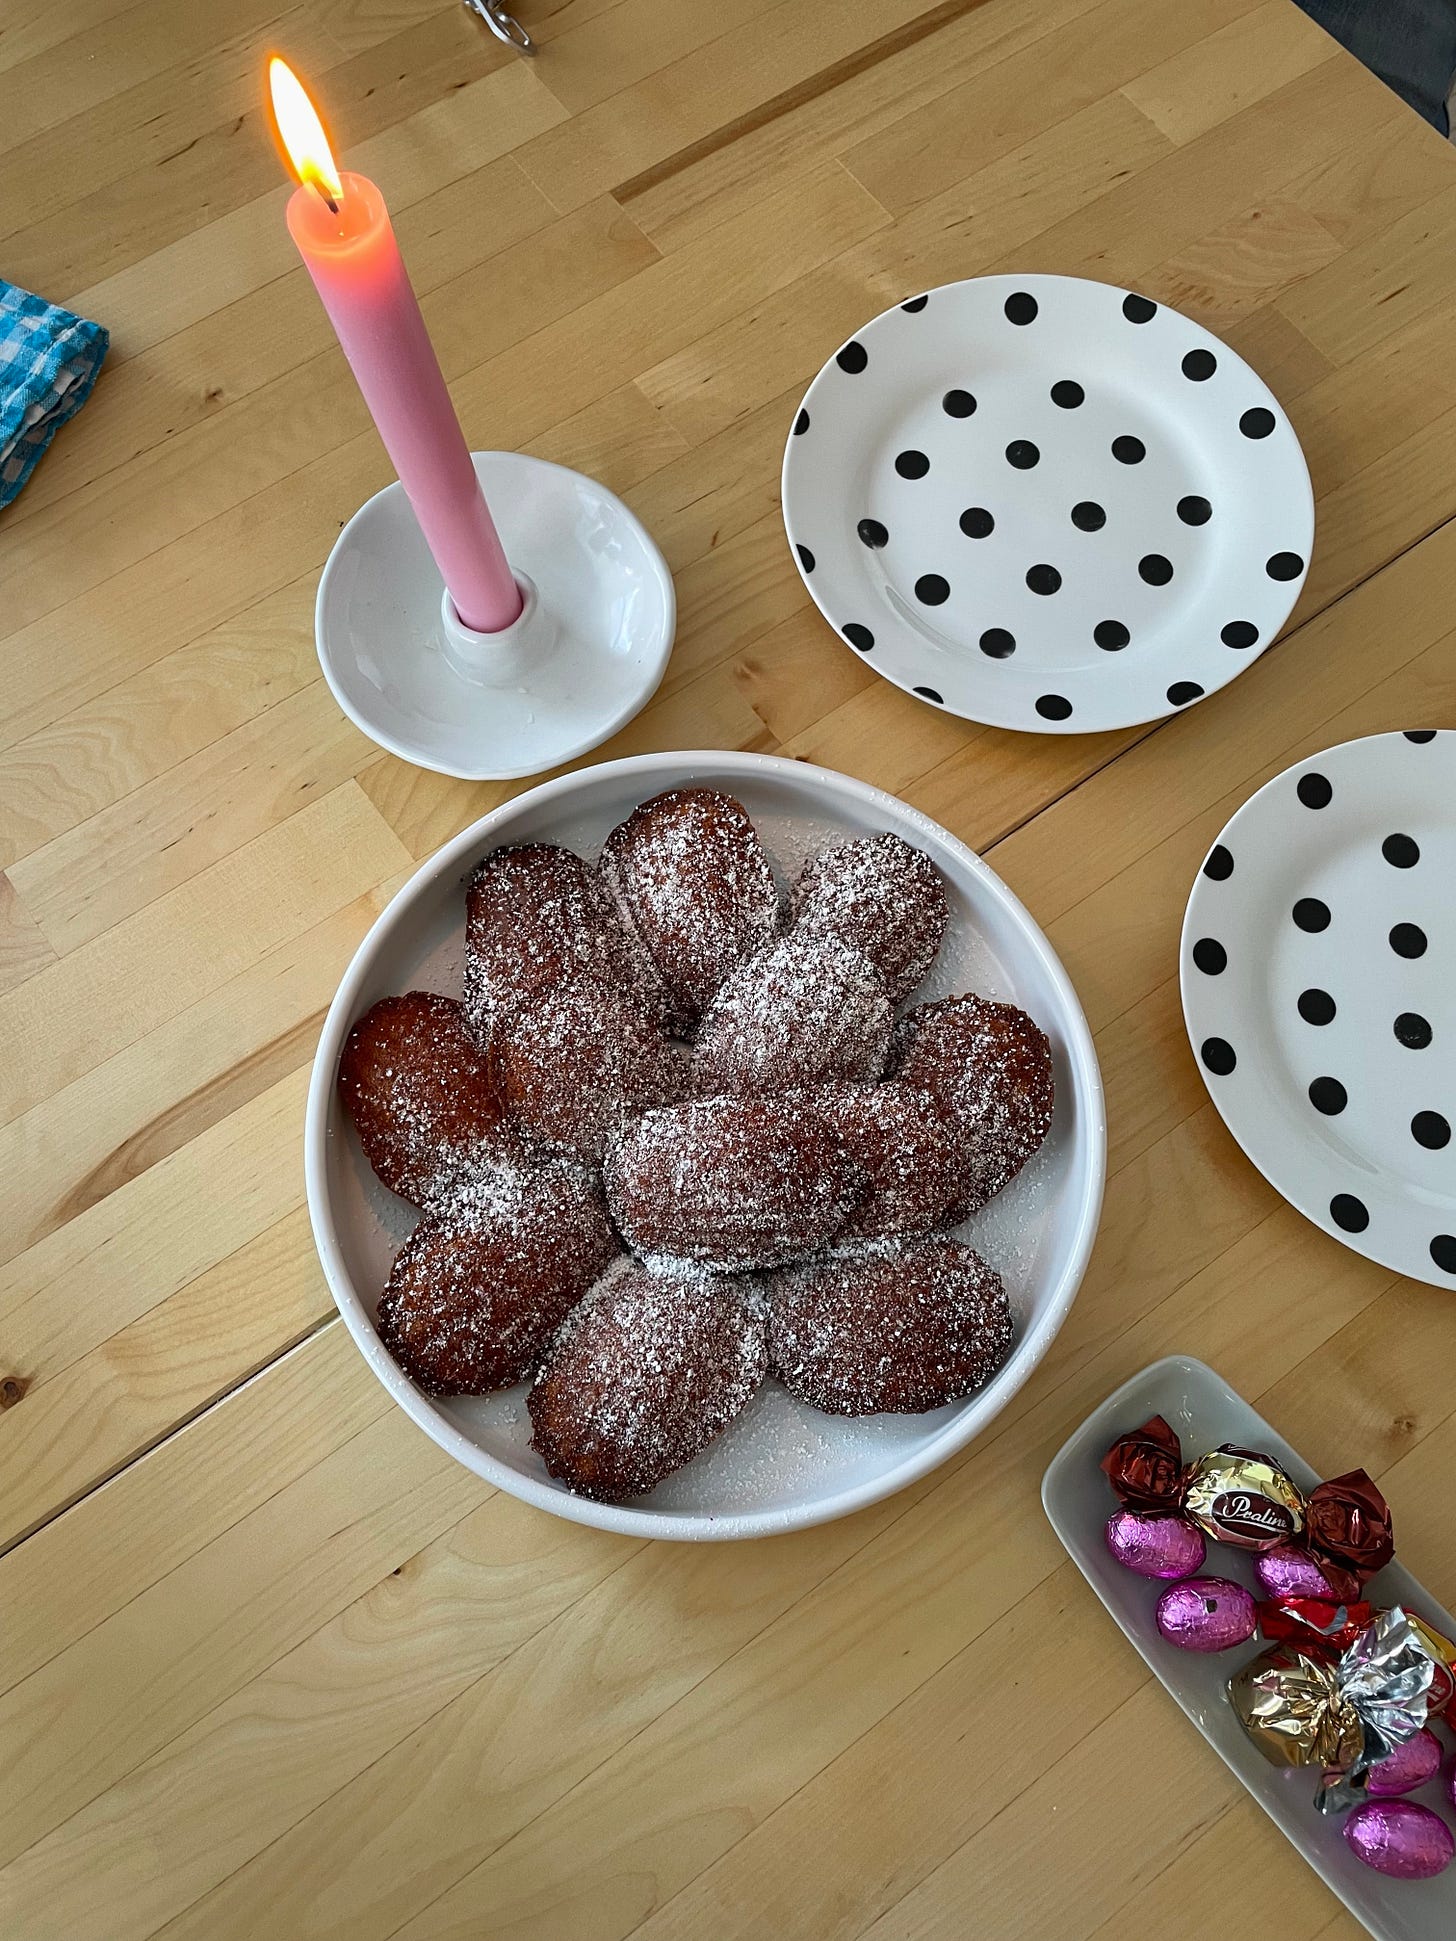 Table setting with a pink candle and a white plate full of madeleine cakes, dusted with icing sugar.